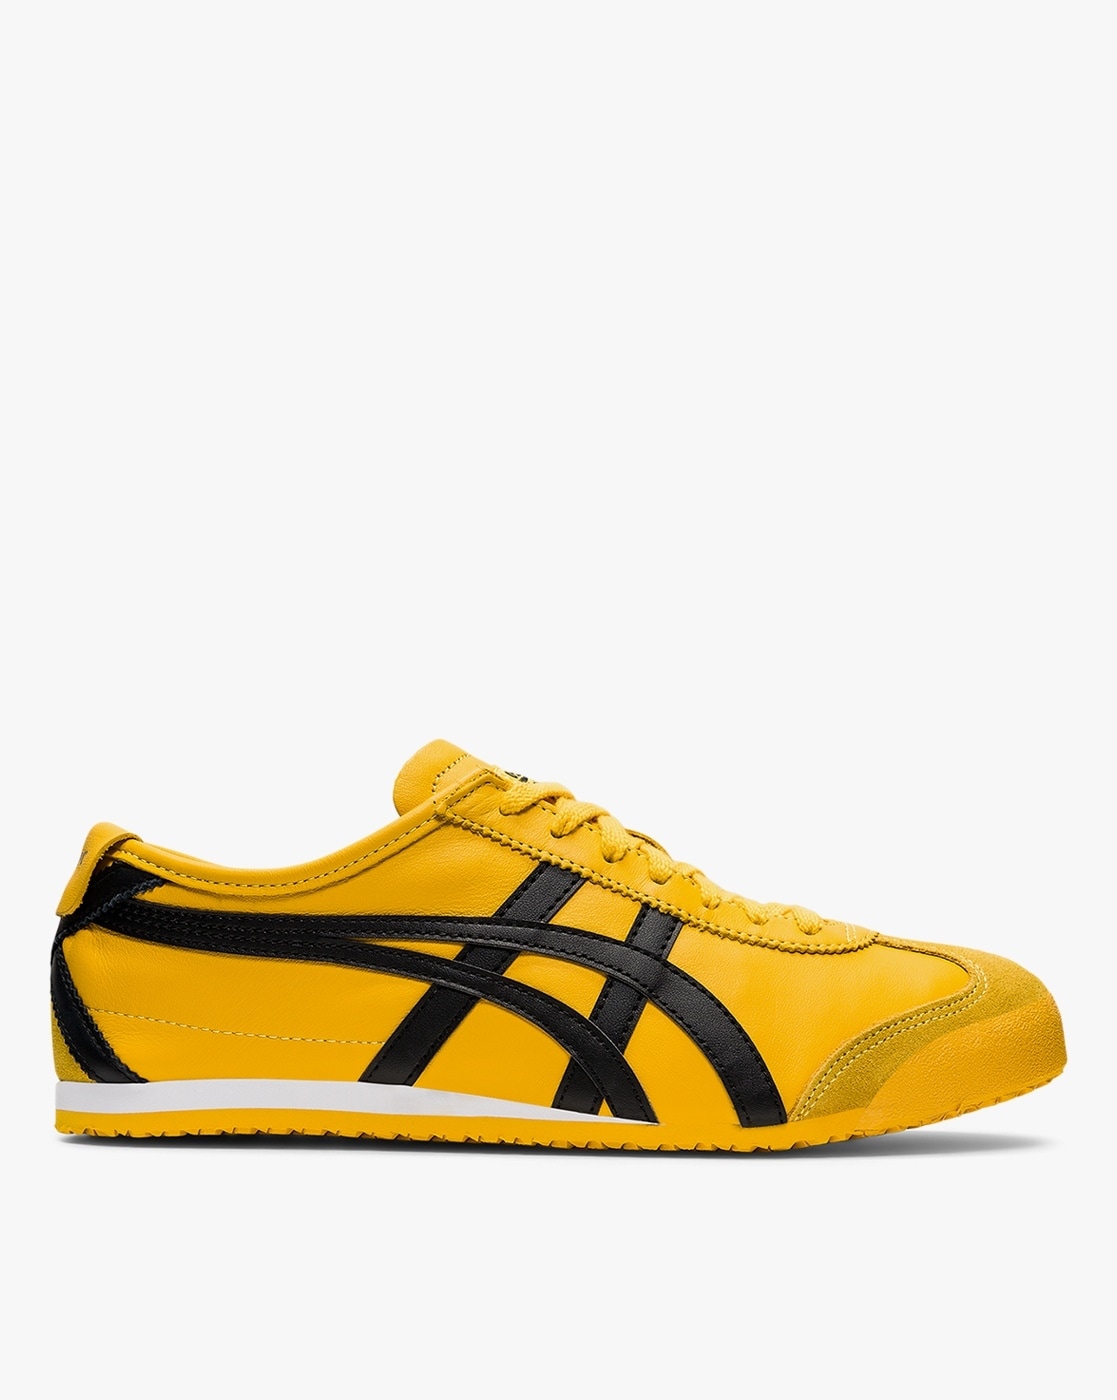 Onitsuka Tiger Mexico 66 SD Yellow | PM TO ORDER | Instagram